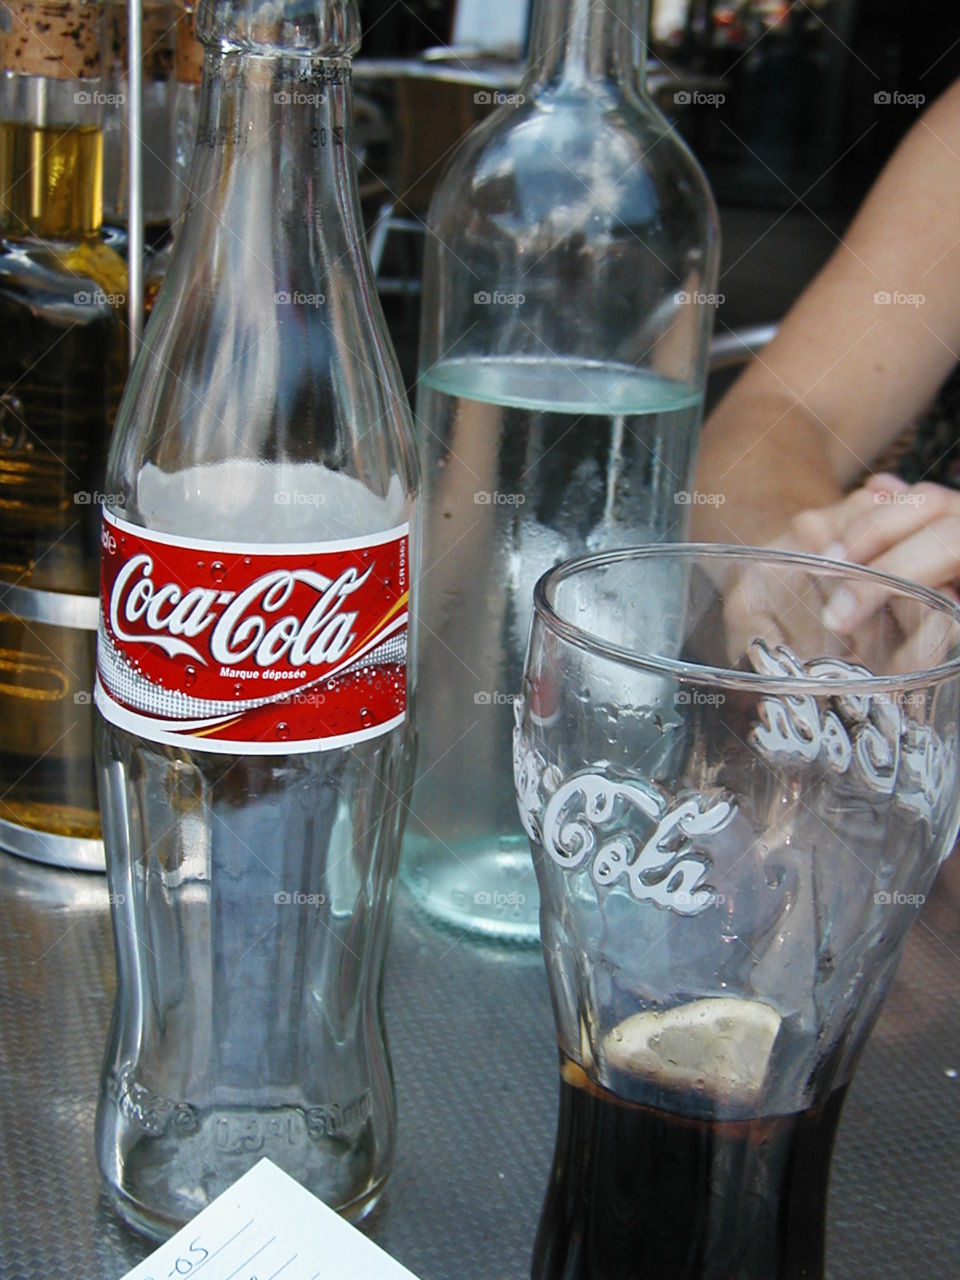 Coca-Cola refreshment . A bottle of Coke and a coke glass at an outdoor cafe in France